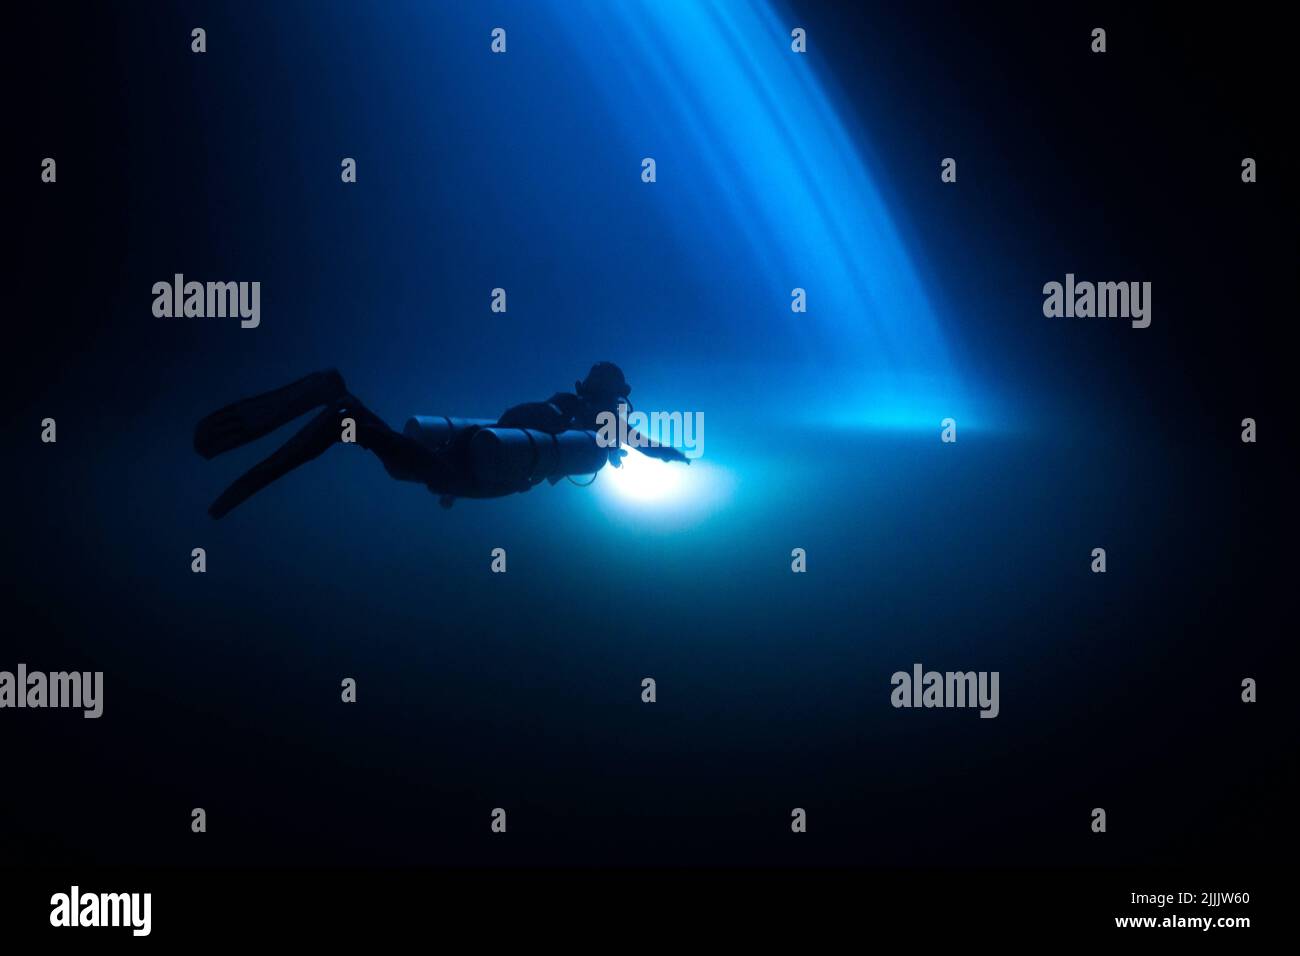 This light forms in the Maravilla cenote. Mexico: THESE HAUNTING images show divers exploring over 200 feet underwater in a mysterious formations fitt Stock Photo